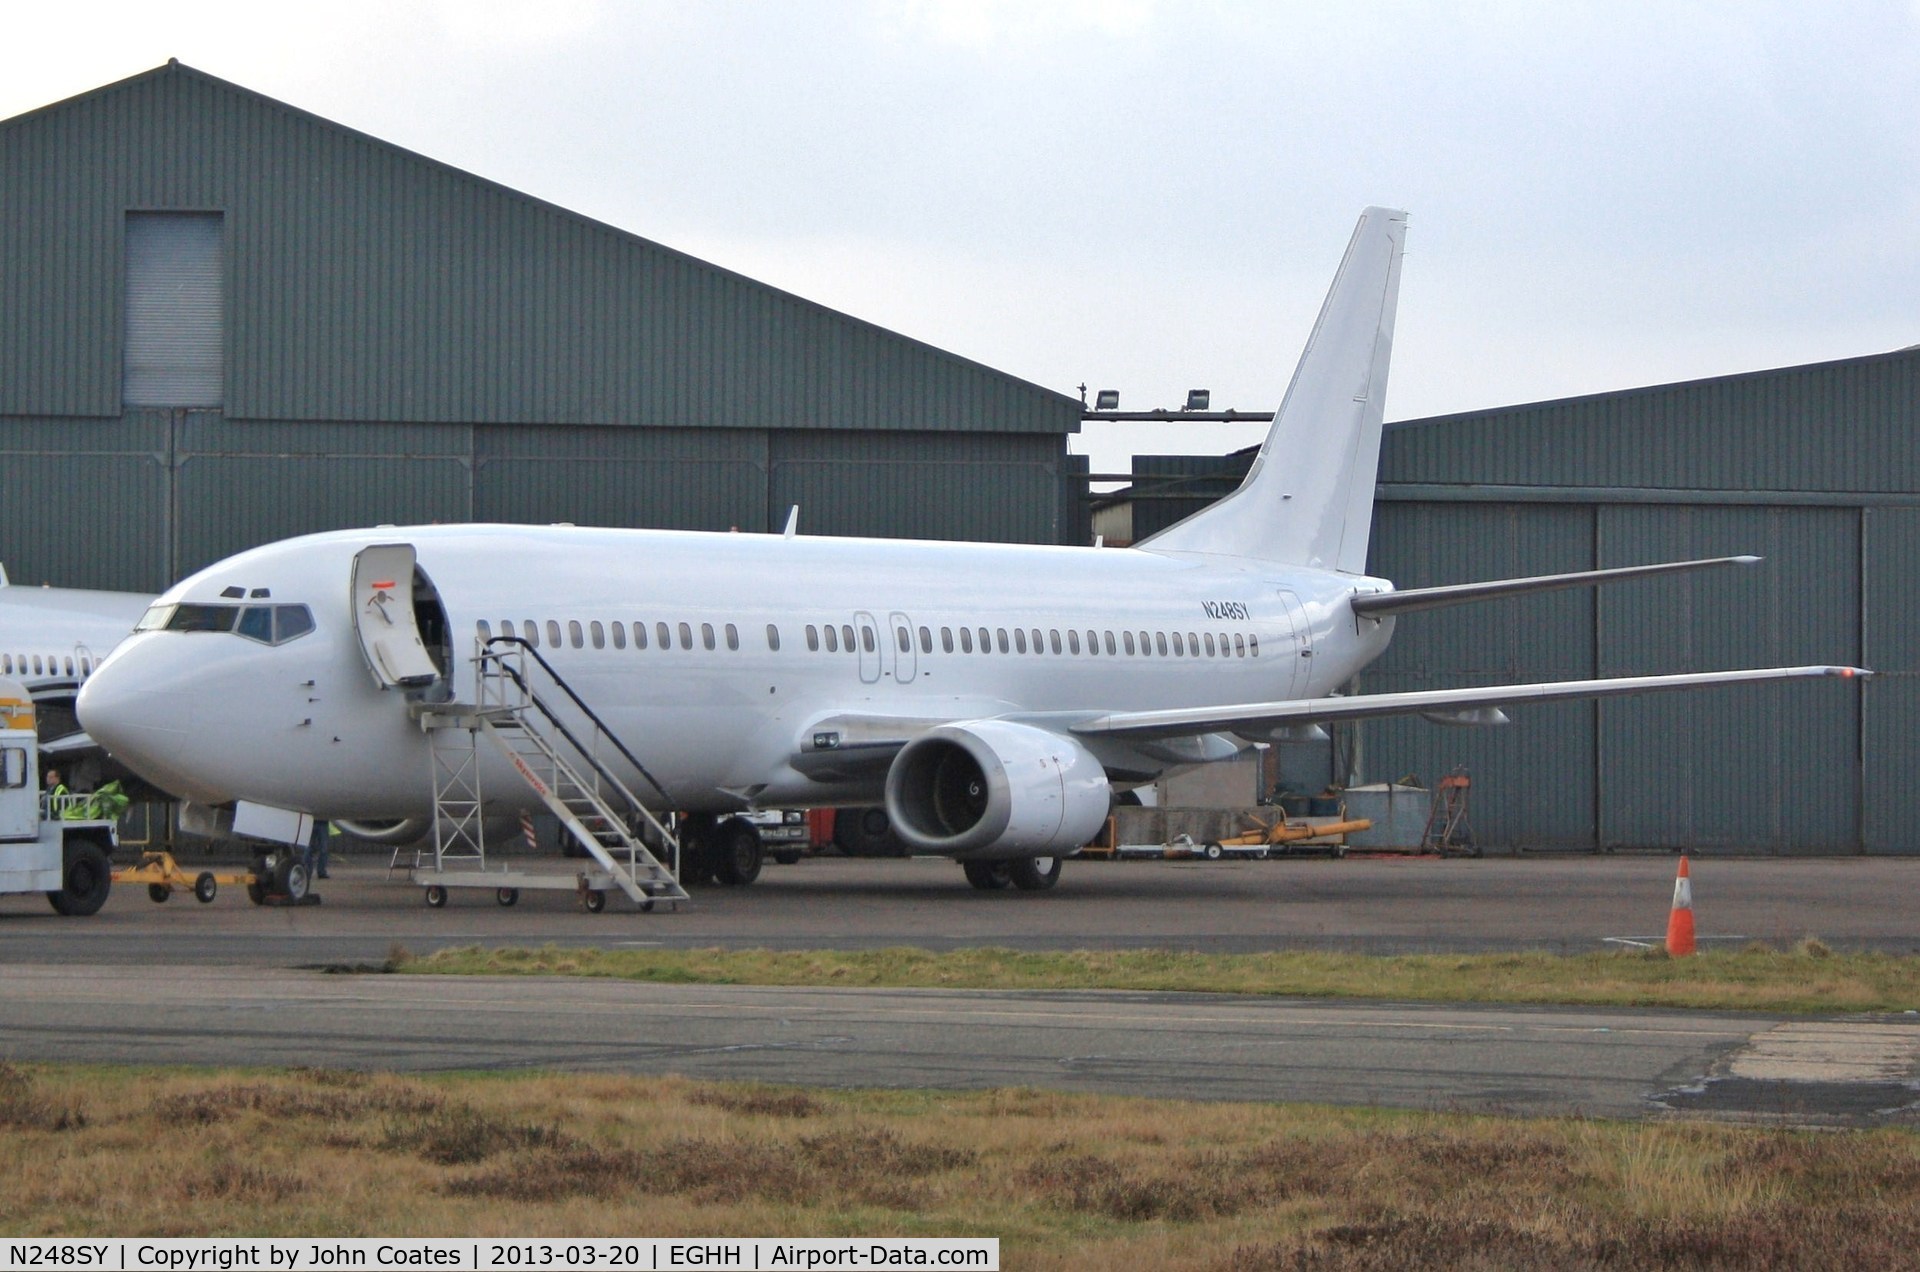 N248SY, 1991 Boeing 737-476 C/N 24438, Waiting to depart after respray white